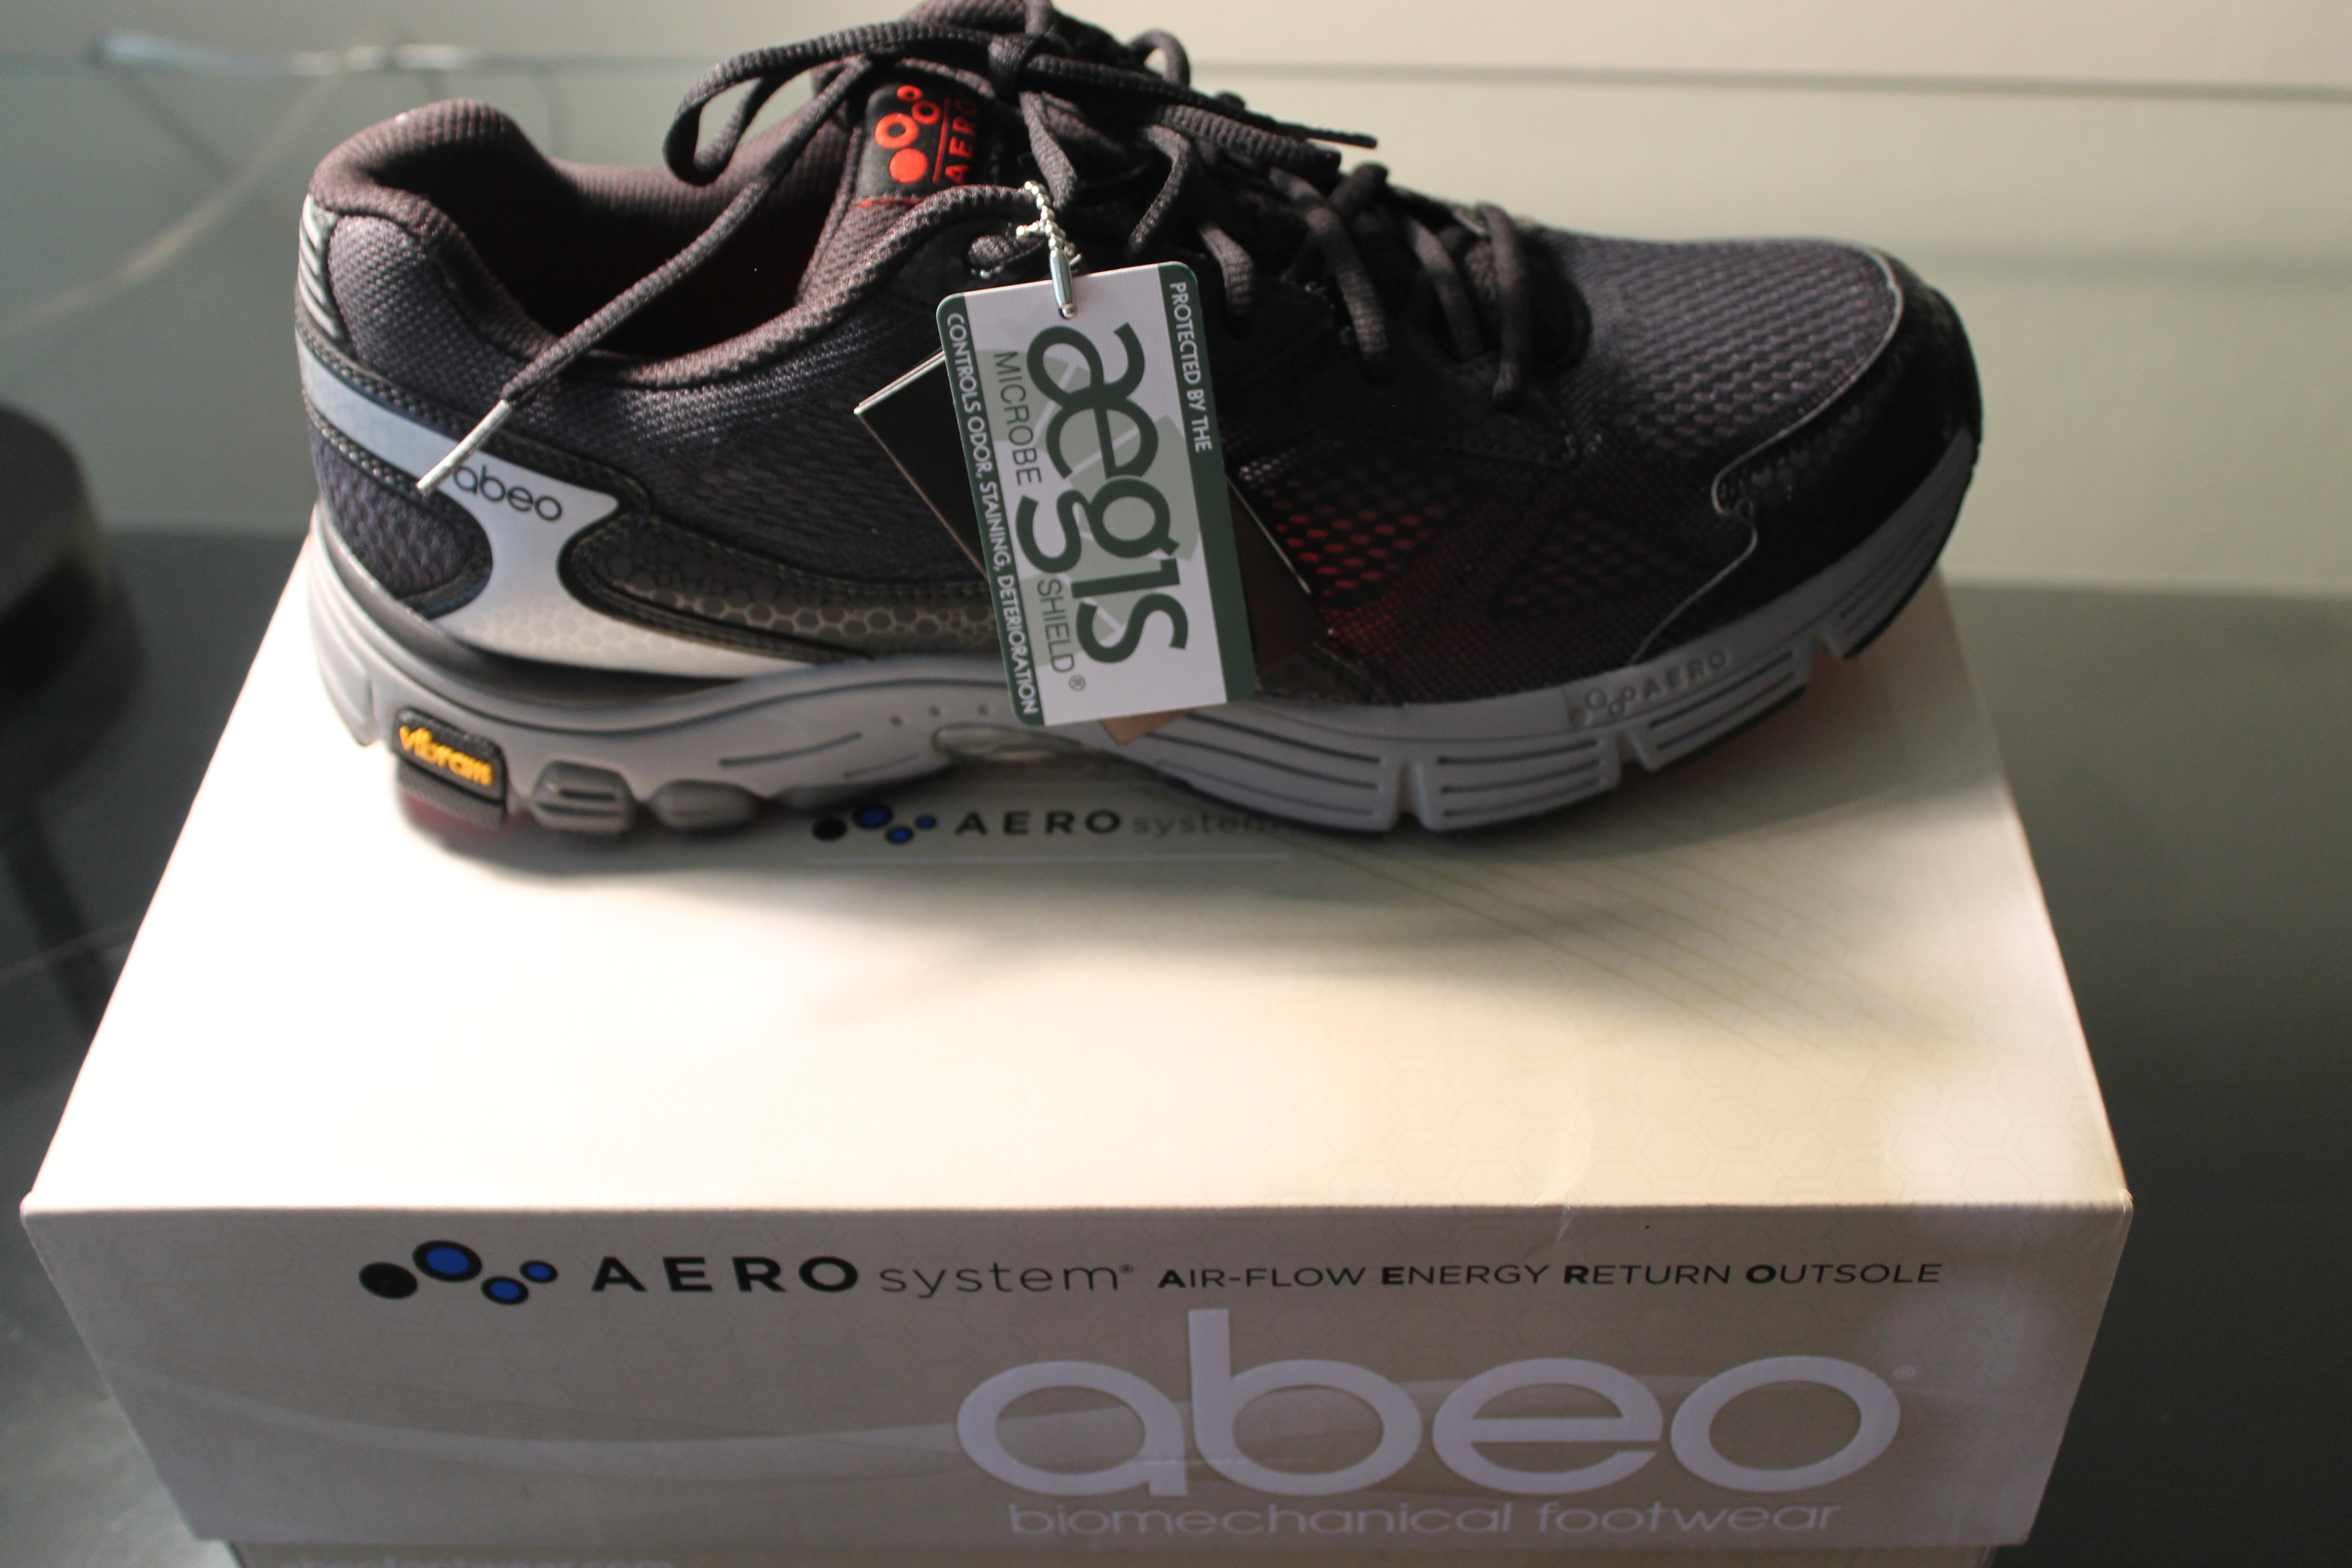 abeo shoes discount